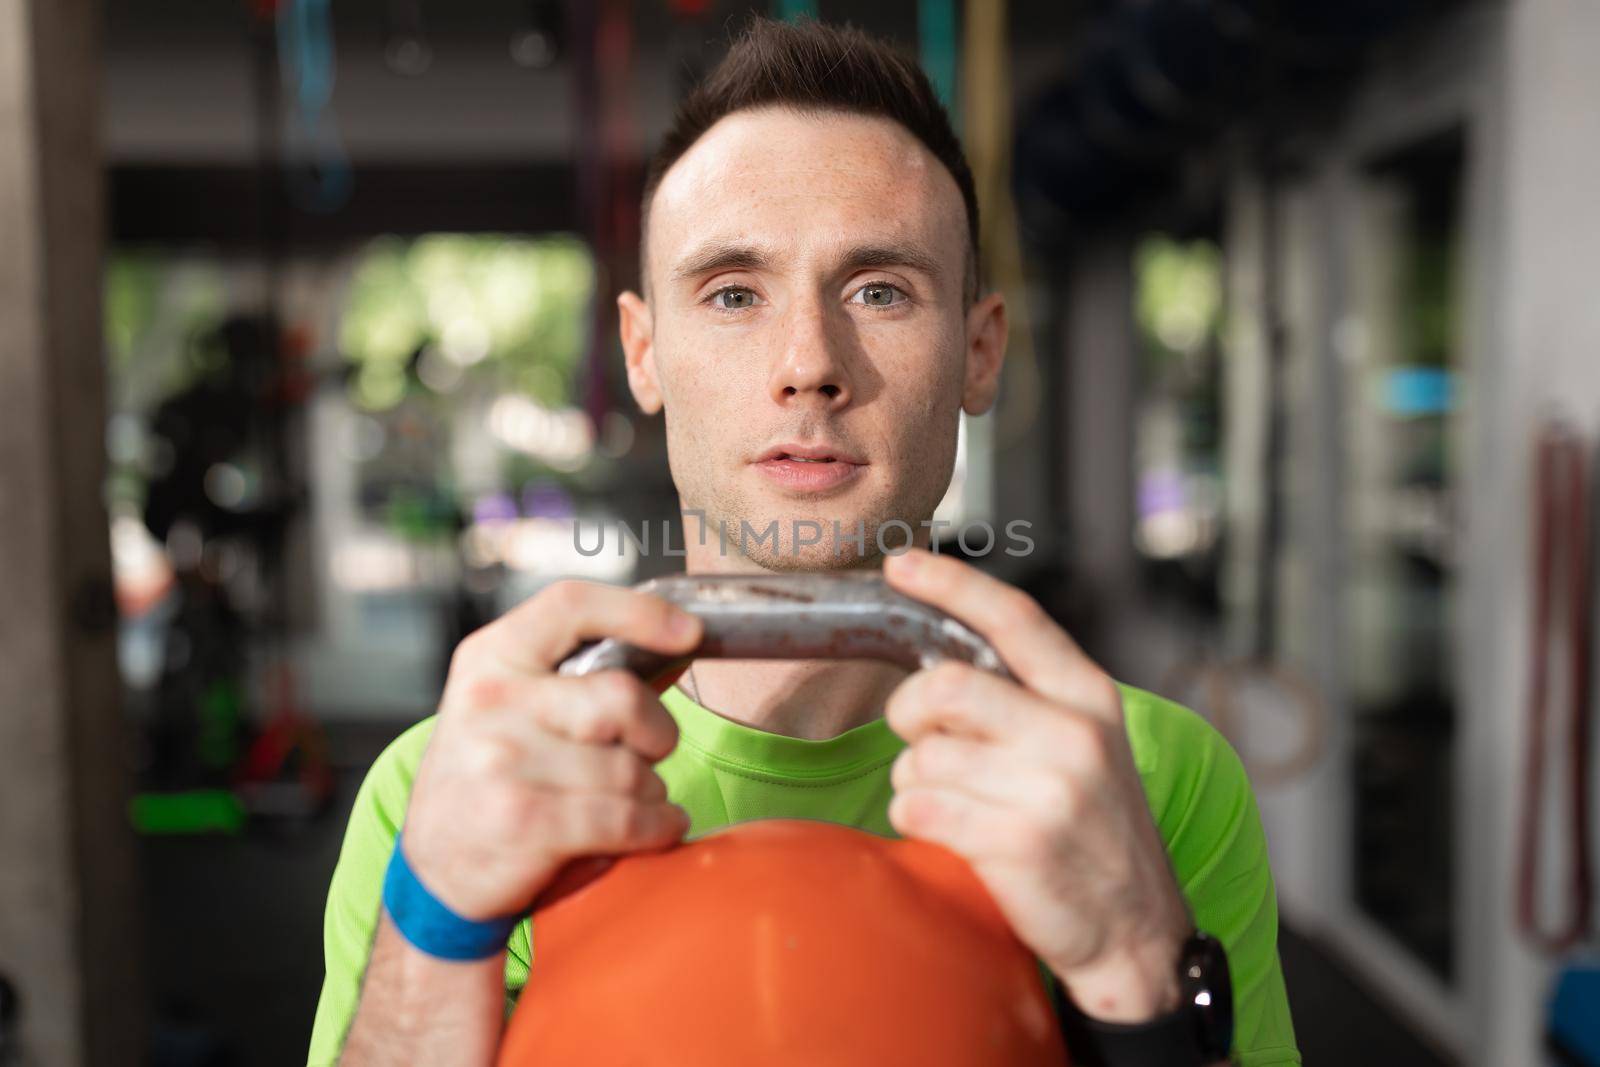 Portrait of a male trainee lifting a kettlebell during a work out session at the local sport and fitness center